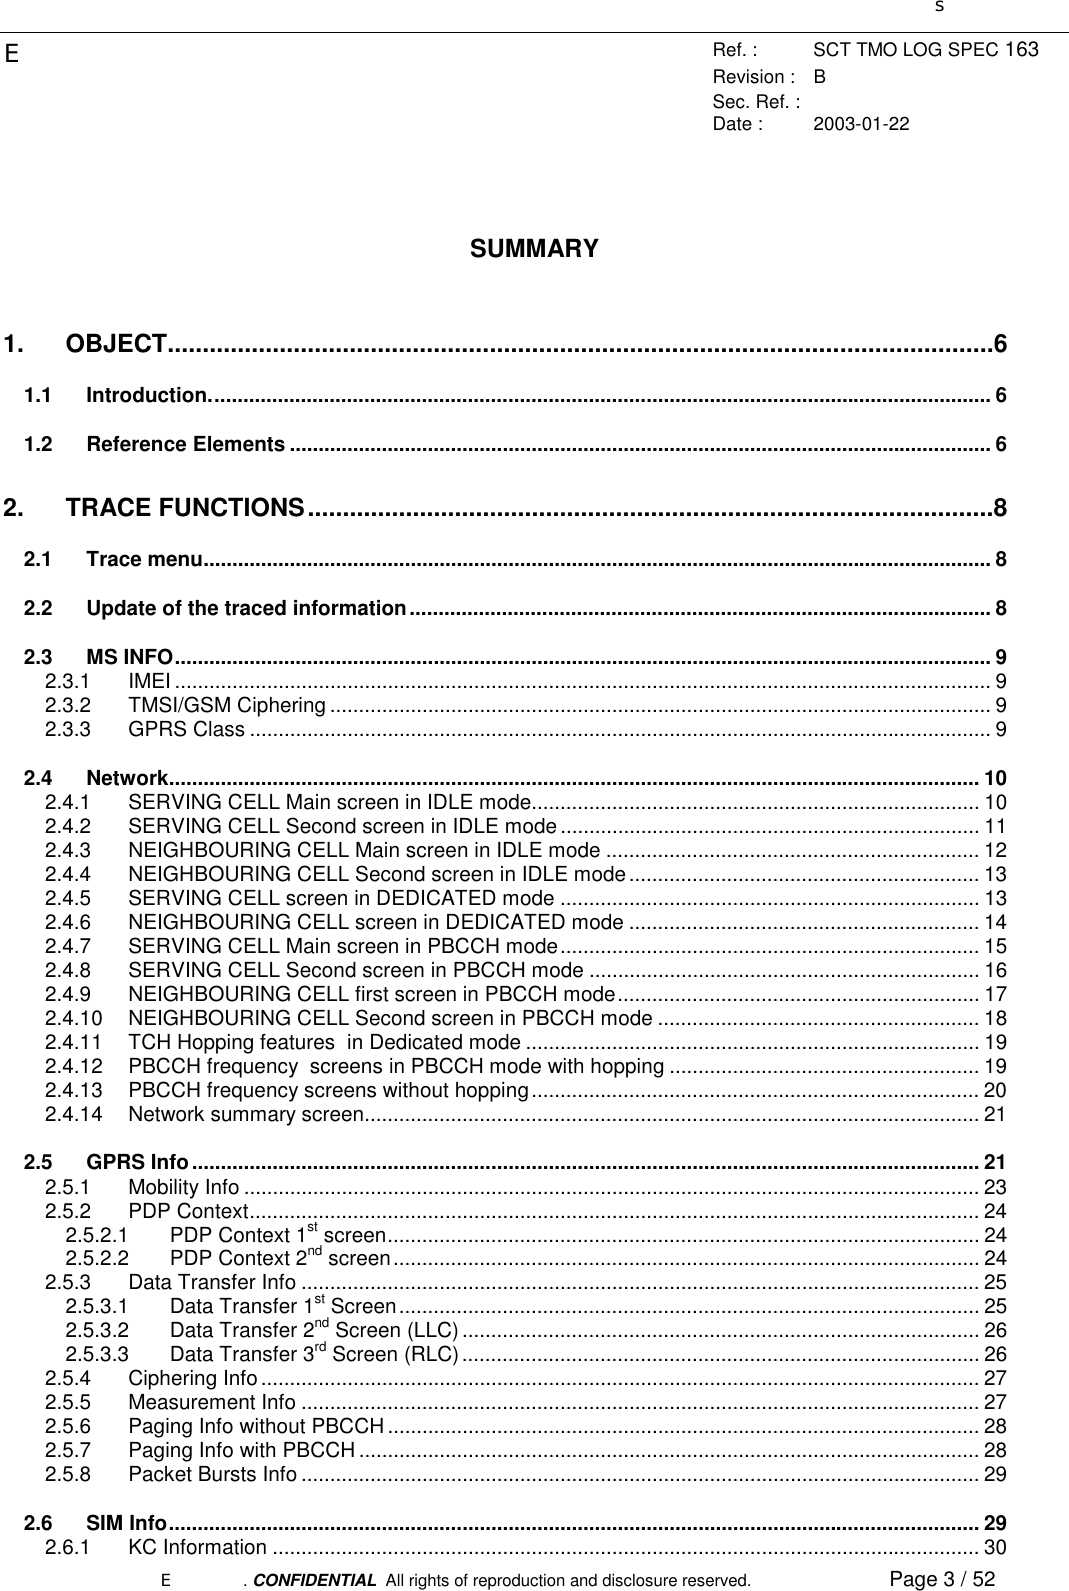 sERef. : SCT TMO LOG SPEC 163Revision : BSec. Ref. :Date : 2003-01-22E. CONFIDENTIAL  All rights of reproduction and disclosure reserved. Page 3 / 52SUMMARY1. OBJECT......................................................................................................................61.1 Introduction........................................................................................................................................ 61.2 Reference Elements .......................................................................................................................... 62. TRACE FUNCTIONS..................................................................................................82.1 Trace menu......................................................................................................................................... 82.2 Update of the traced information..................................................................................................... 82.3 MS INFO.............................................................................................................................................. 92.3.1 IMEI .............................................................................................................................................. 92.3.2 TMSI/GSM Ciphering ................................................................................................................... 92.3.3 GPRS Class ................................................................................................................................. 92.4 Network............................................................................................................................................. 102.4.1 SERVING CELL Main screen in IDLE mode.............................................................................. 102.4.2 SERVING CELL Second screen in IDLE mode ......................................................................... 112.4.3 NEIGHBOURING CELL Main screen in IDLE mode ................................................................. 122.4.4 NEIGHBOURING CELL Second screen in IDLE mode............................................................. 132.4.5 SERVING CELL screen in DEDICATED mode ......................................................................... 132.4.6 NEIGHBOURING CELL screen in DEDICATED mode ............................................................. 142.4.7 SERVING CELL Main screen in PBCCH mode......................................................................... 152.4.8 SERVING CELL Second screen in PBCCH mode .................................................................... 162.4.9 NEIGHBOURING CELL first screen in PBCCH mode............................................................... 172.4.10 NEIGHBOURING CELL Second screen in PBCCH mode ........................................................ 182.4.11 TCH Hopping features  in Dedicated mode ............................................................................... 192.4.12 PBCCH frequency  screens in PBCCH mode with hopping ...................................................... 192.4.13 PBCCH frequency screens without hopping.............................................................................. 202.4.14 Network summary screen........................................................................................................... 212.5 GPRS Info......................................................................................................................................... 212.5.1 Mobility Info ................................................................................................................................ 232.5.2 PDP Context............................................................................................................................... 242.5.2.1 PDP Context 1st screen....................................................................................................... 242.5.2.2 PDP Context 2nd screen...................................................................................................... 242.5.3 Data Transfer Info ...................................................................................................................... 252.5.3.1 Data Transfer 1st Screen..................................................................................................... 252.5.3.2 Data Transfer 2nd Screen (LLC).......................................................................................... 262.5.3.3 Data Transfer 3rd Screen (RLC).......................................................................................... 262.5.4 Ciphering Info............................................................................................................................. 272.5.5 Measurement Info ...................................................................................................................... 272.5.6 Paging Info without PBCCH ....................................................................................................... 282.5.7 Paging Info with PBCCH ............................................................................................................ 282.5.8 Packet Bursts Info ...................................................................................................................... 292.6 SIM Info............................................................................................................................................. 292.6.1 KC Information ........................................................................................................................... 30